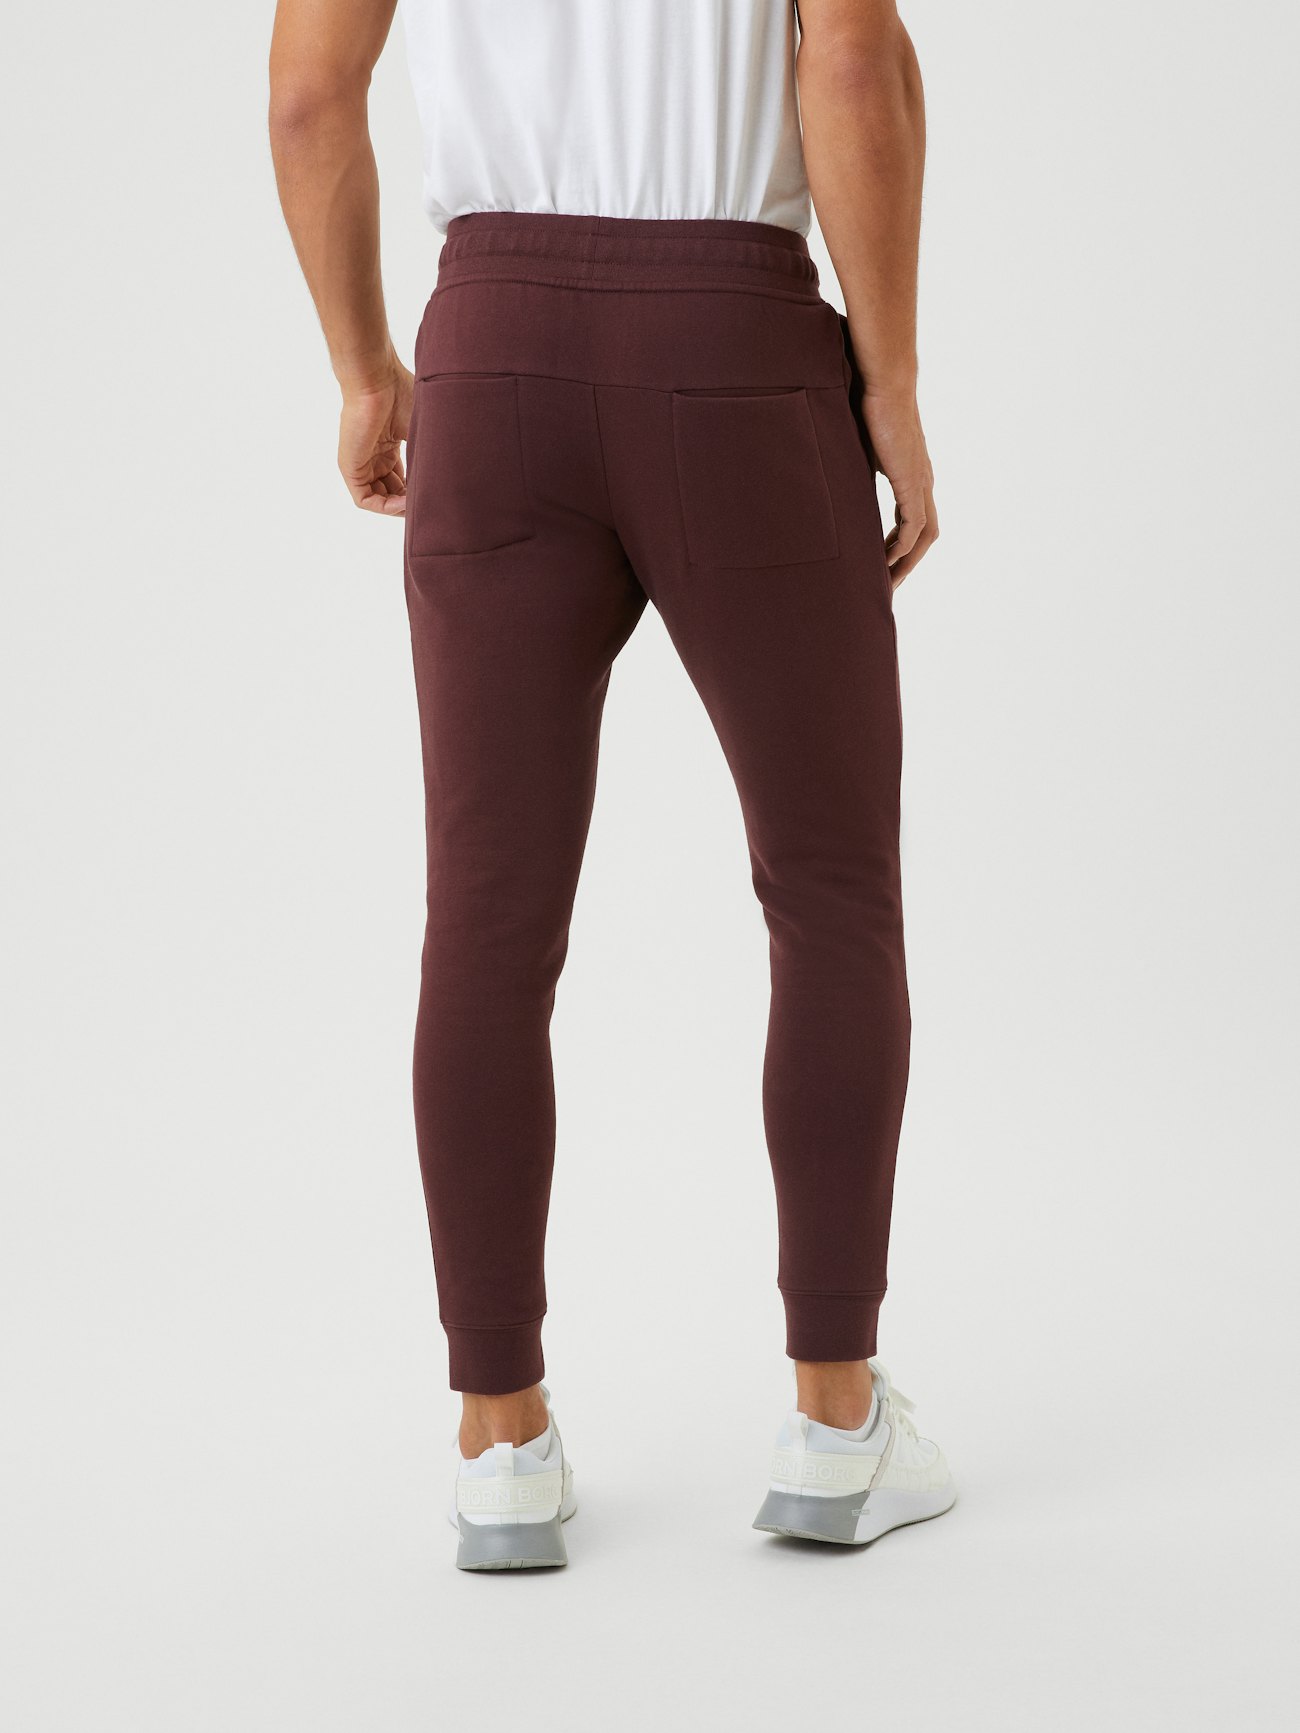 Centre Tapered Pants - Decadent Chocolate